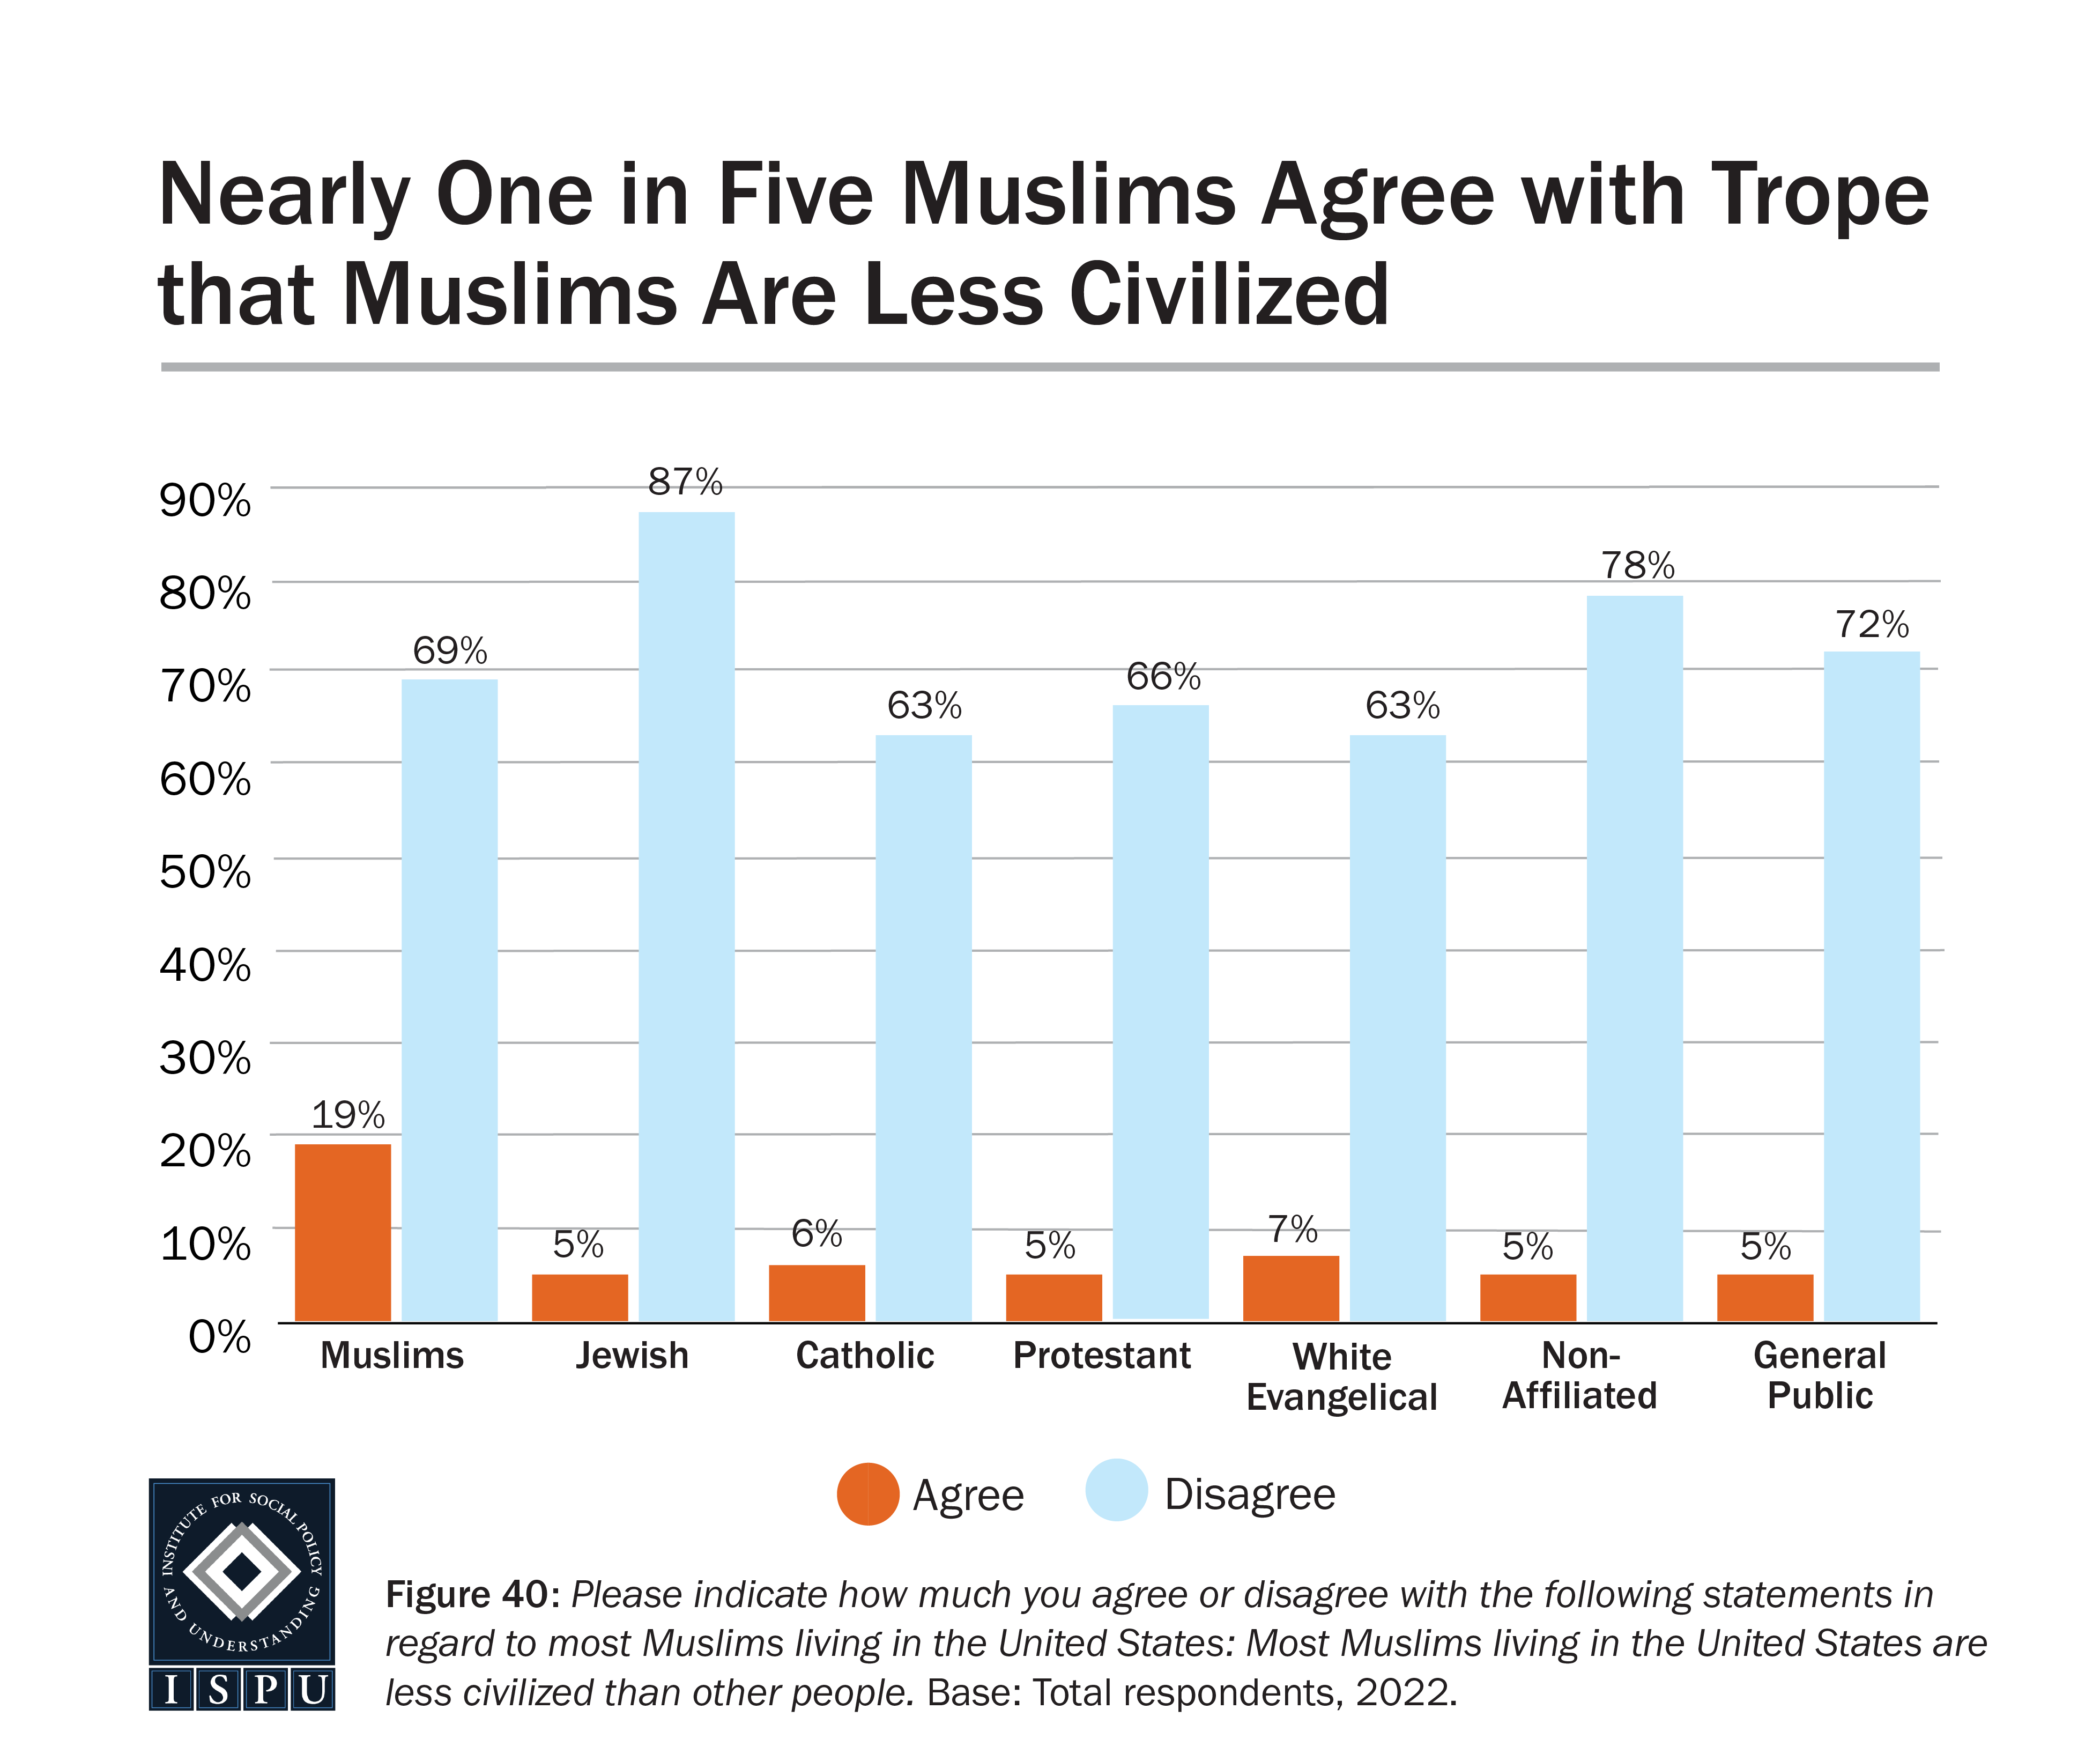 A bar graph showing the proportion of all groups surveyed who agree or disagree with the false notion that most Muslims living in the US are less civilized than others.